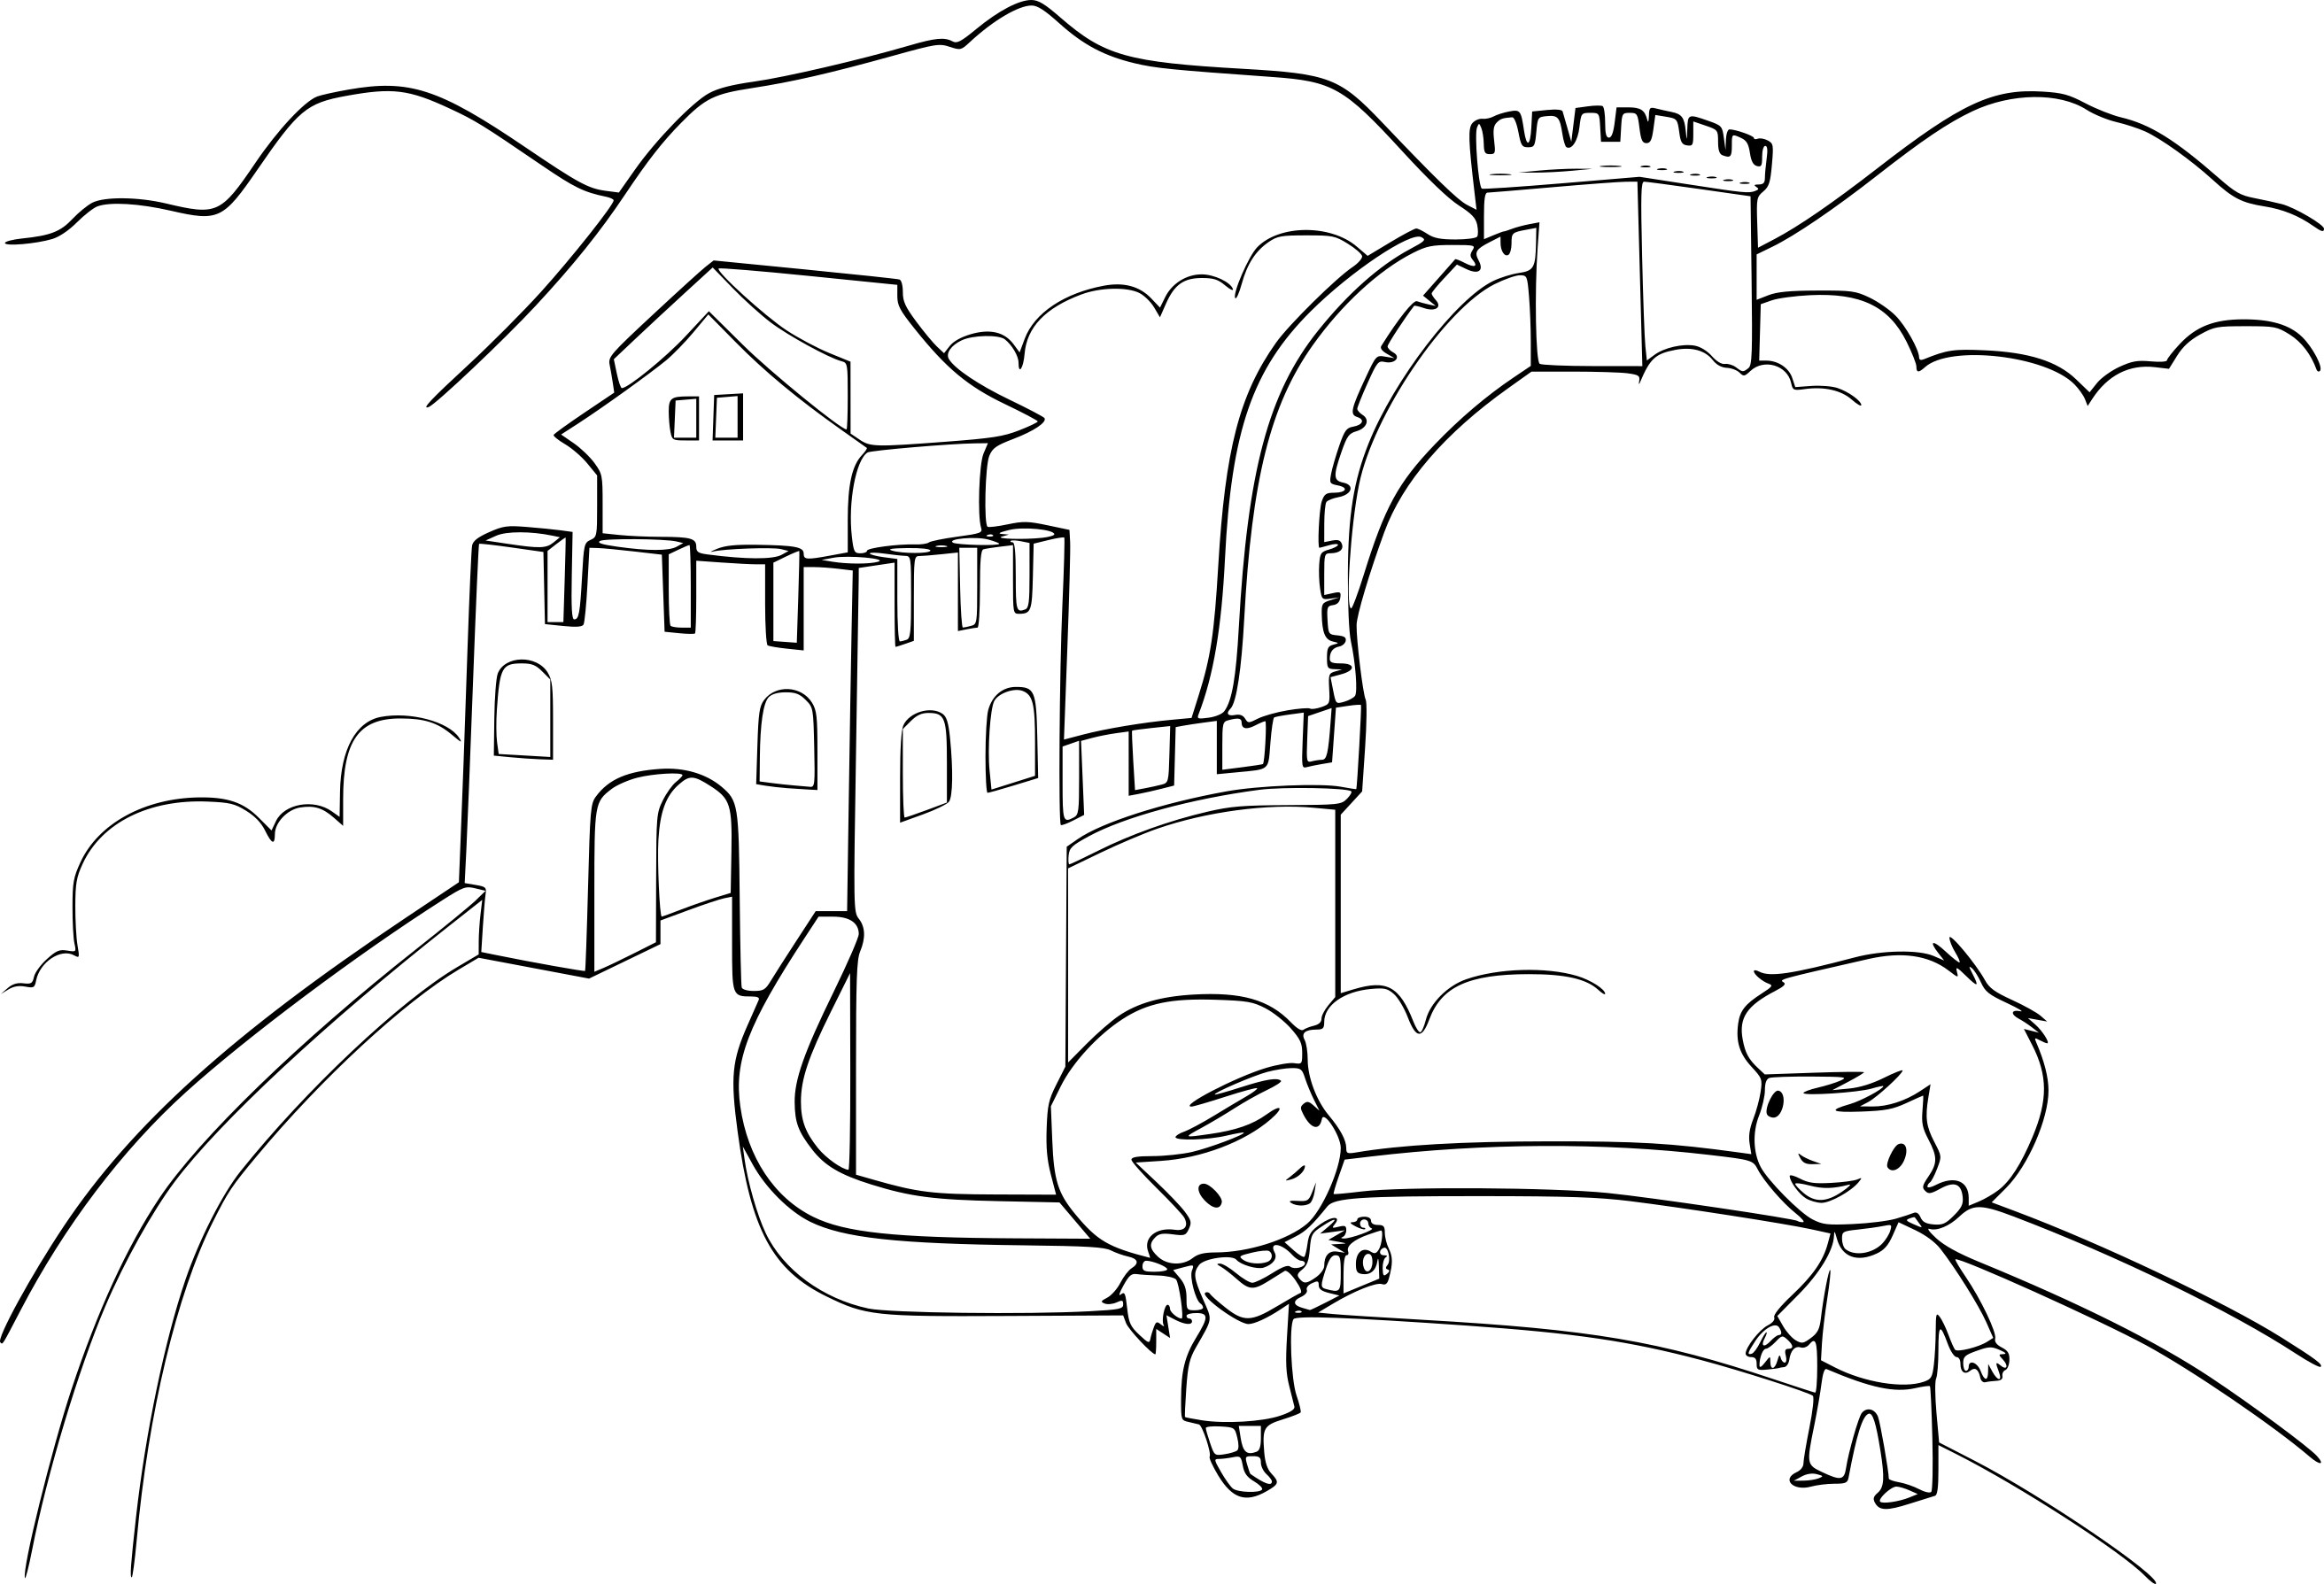 Great Wall Of China coloring page